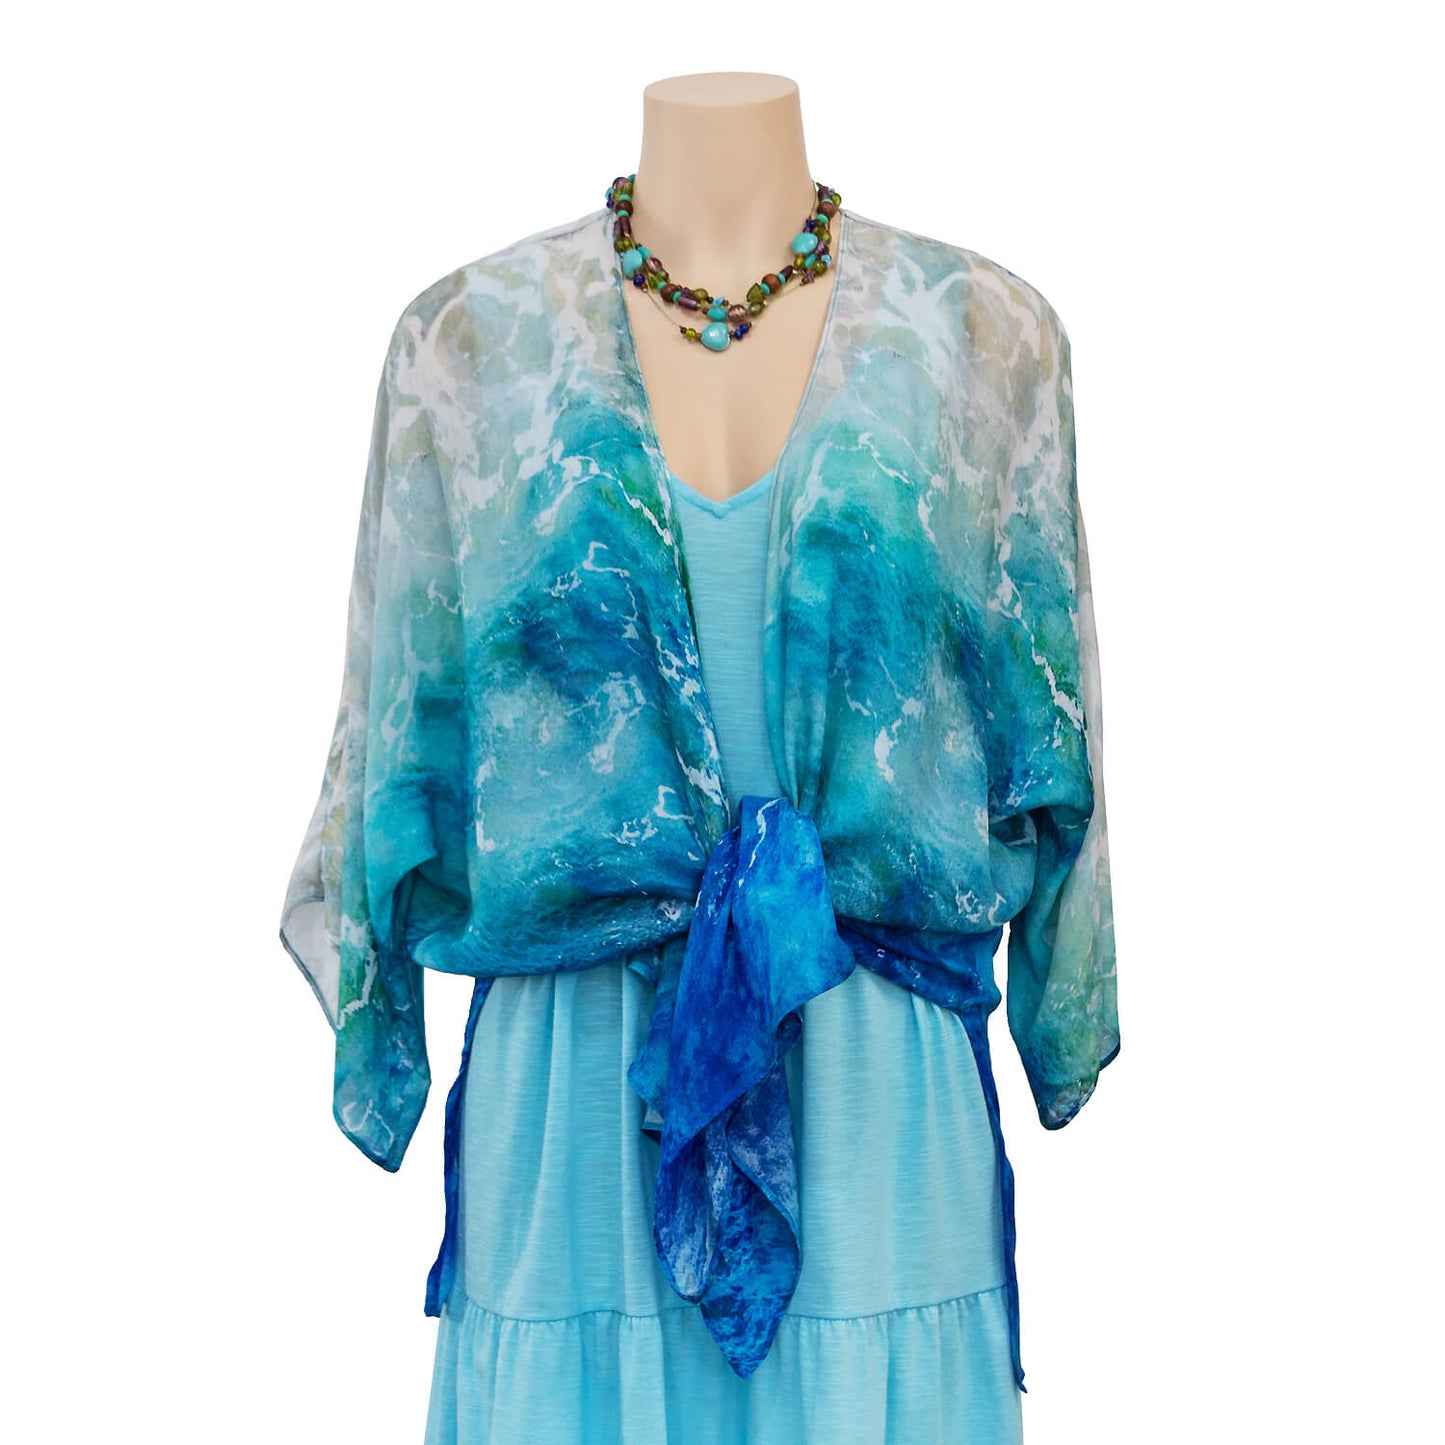 barchetta waterfall jacket tied in front over blue dress